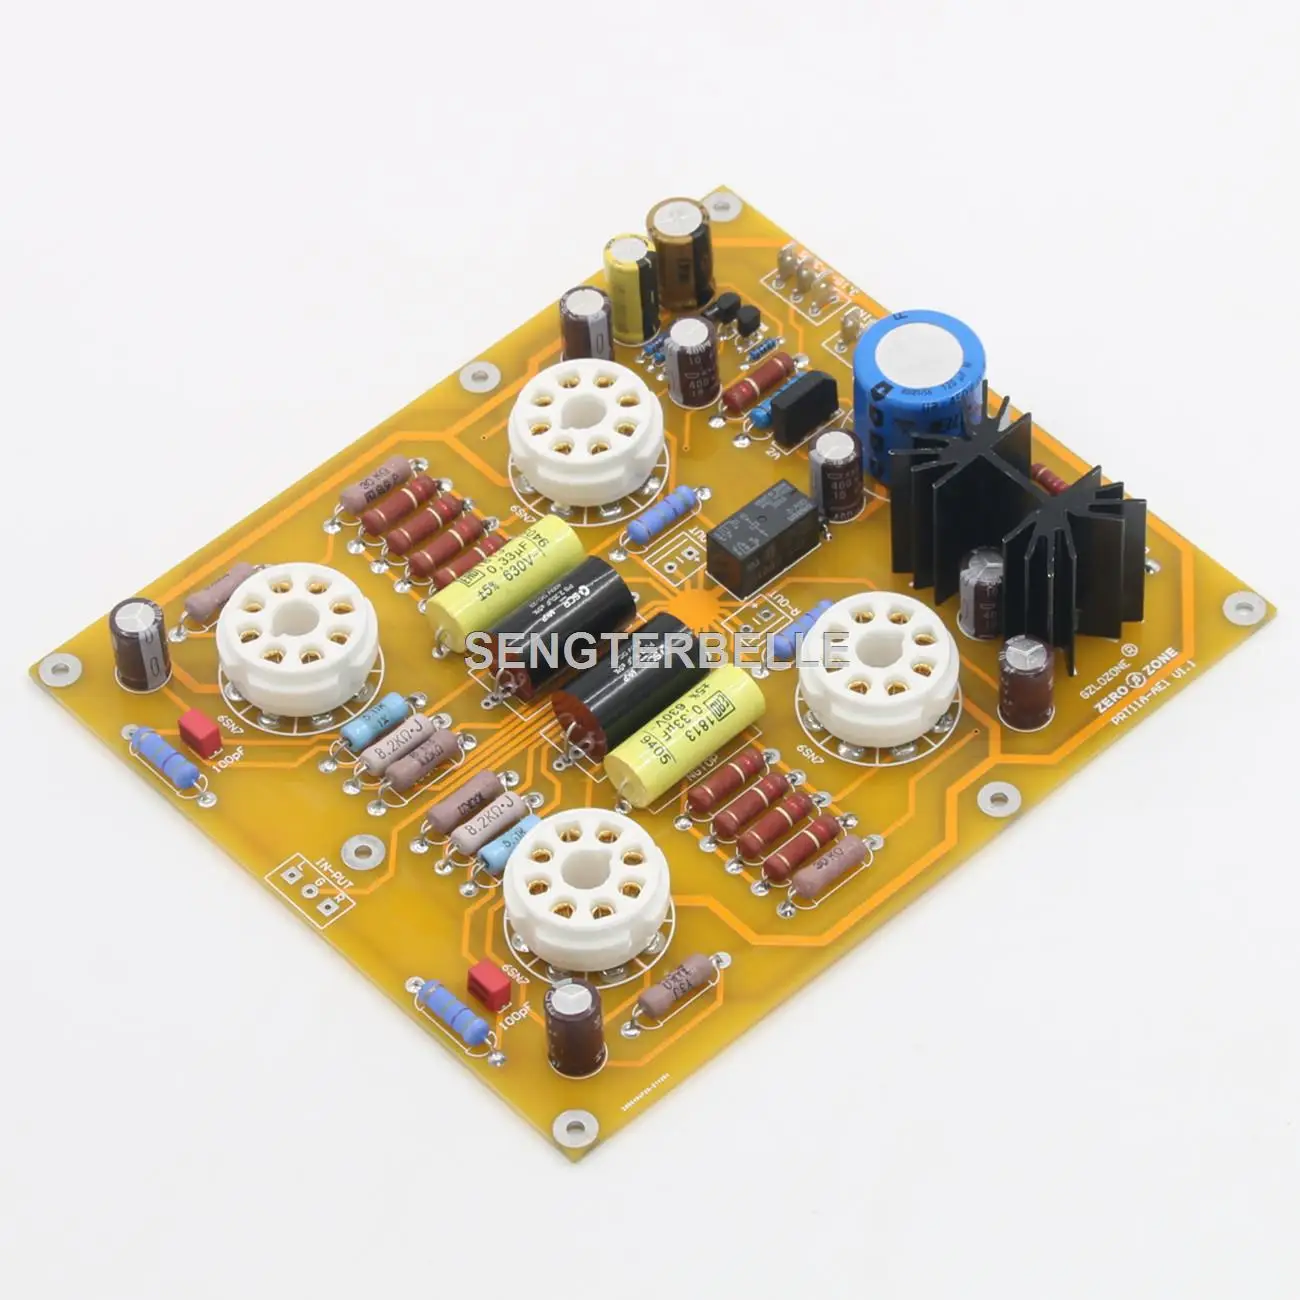 

HiFi Upgraded 6N8P / 6SN7 Stereo Tube Preamplifier Board Refer US Gary CARY-AE1 Preamp Circuit